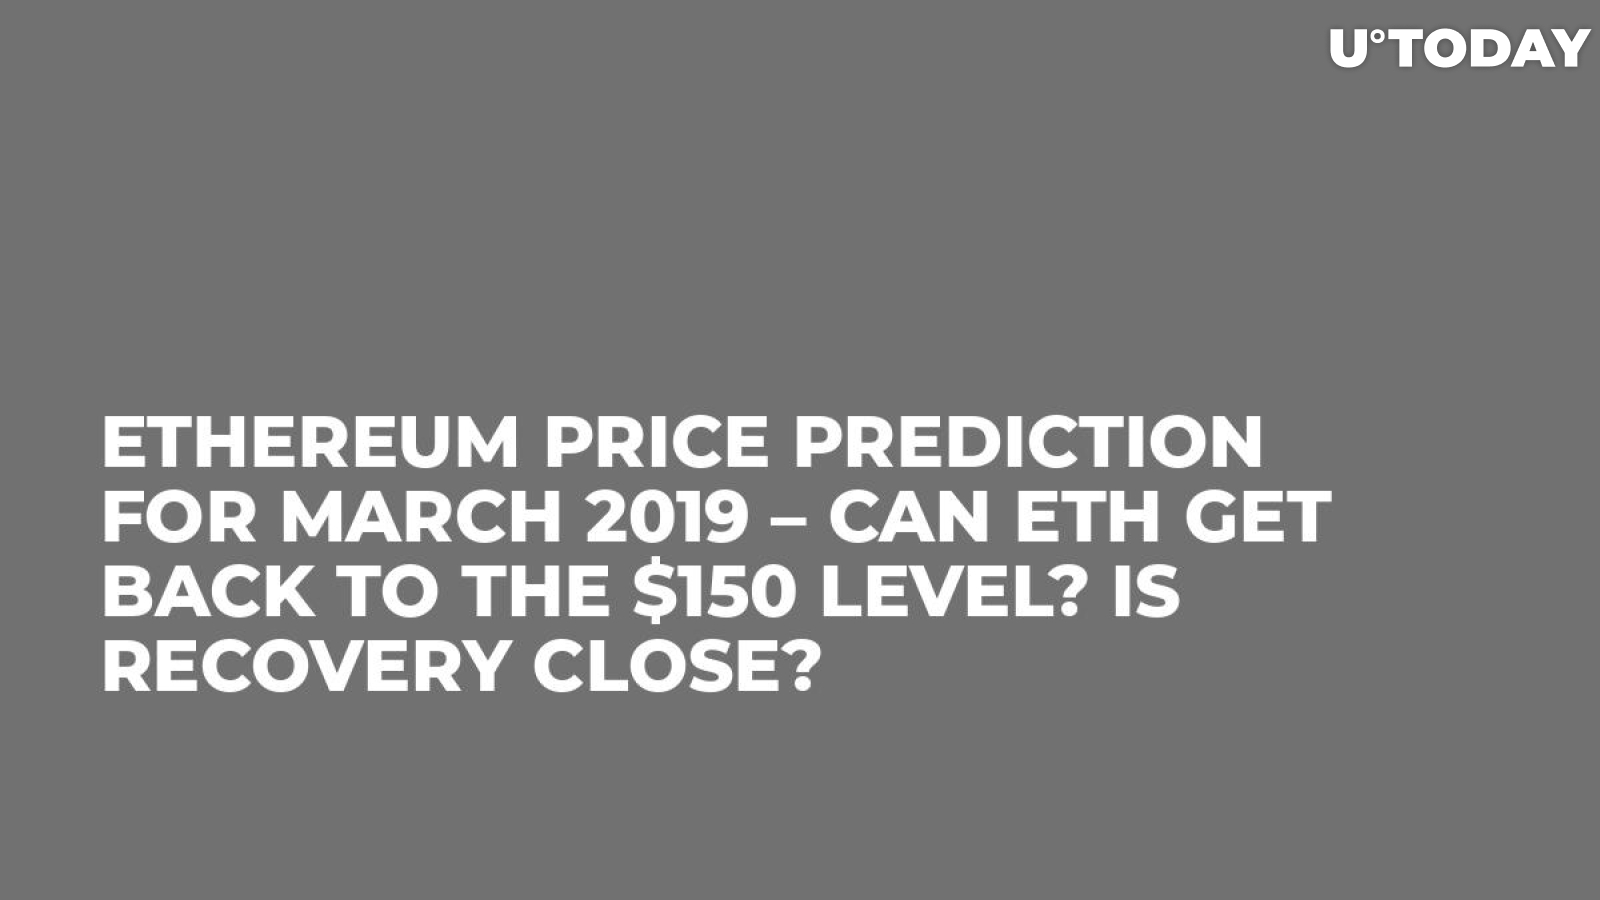 Ethereum Price Prediction for March 2019 – Can ETH Get Back to the $150 Level? Is Recovery Close?